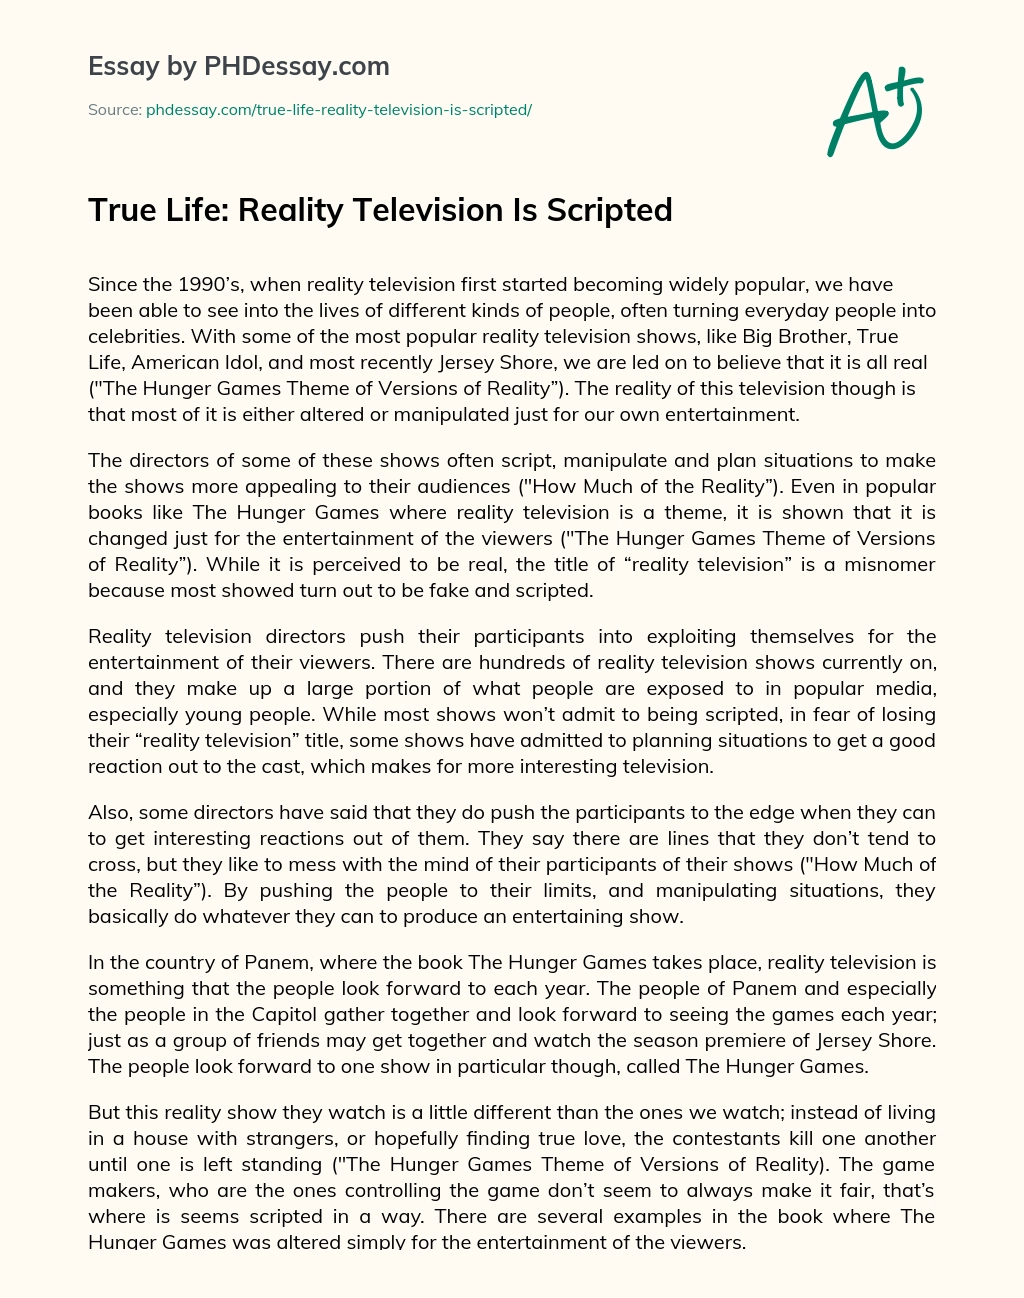 True Life: Reality Television Is Scripted essay